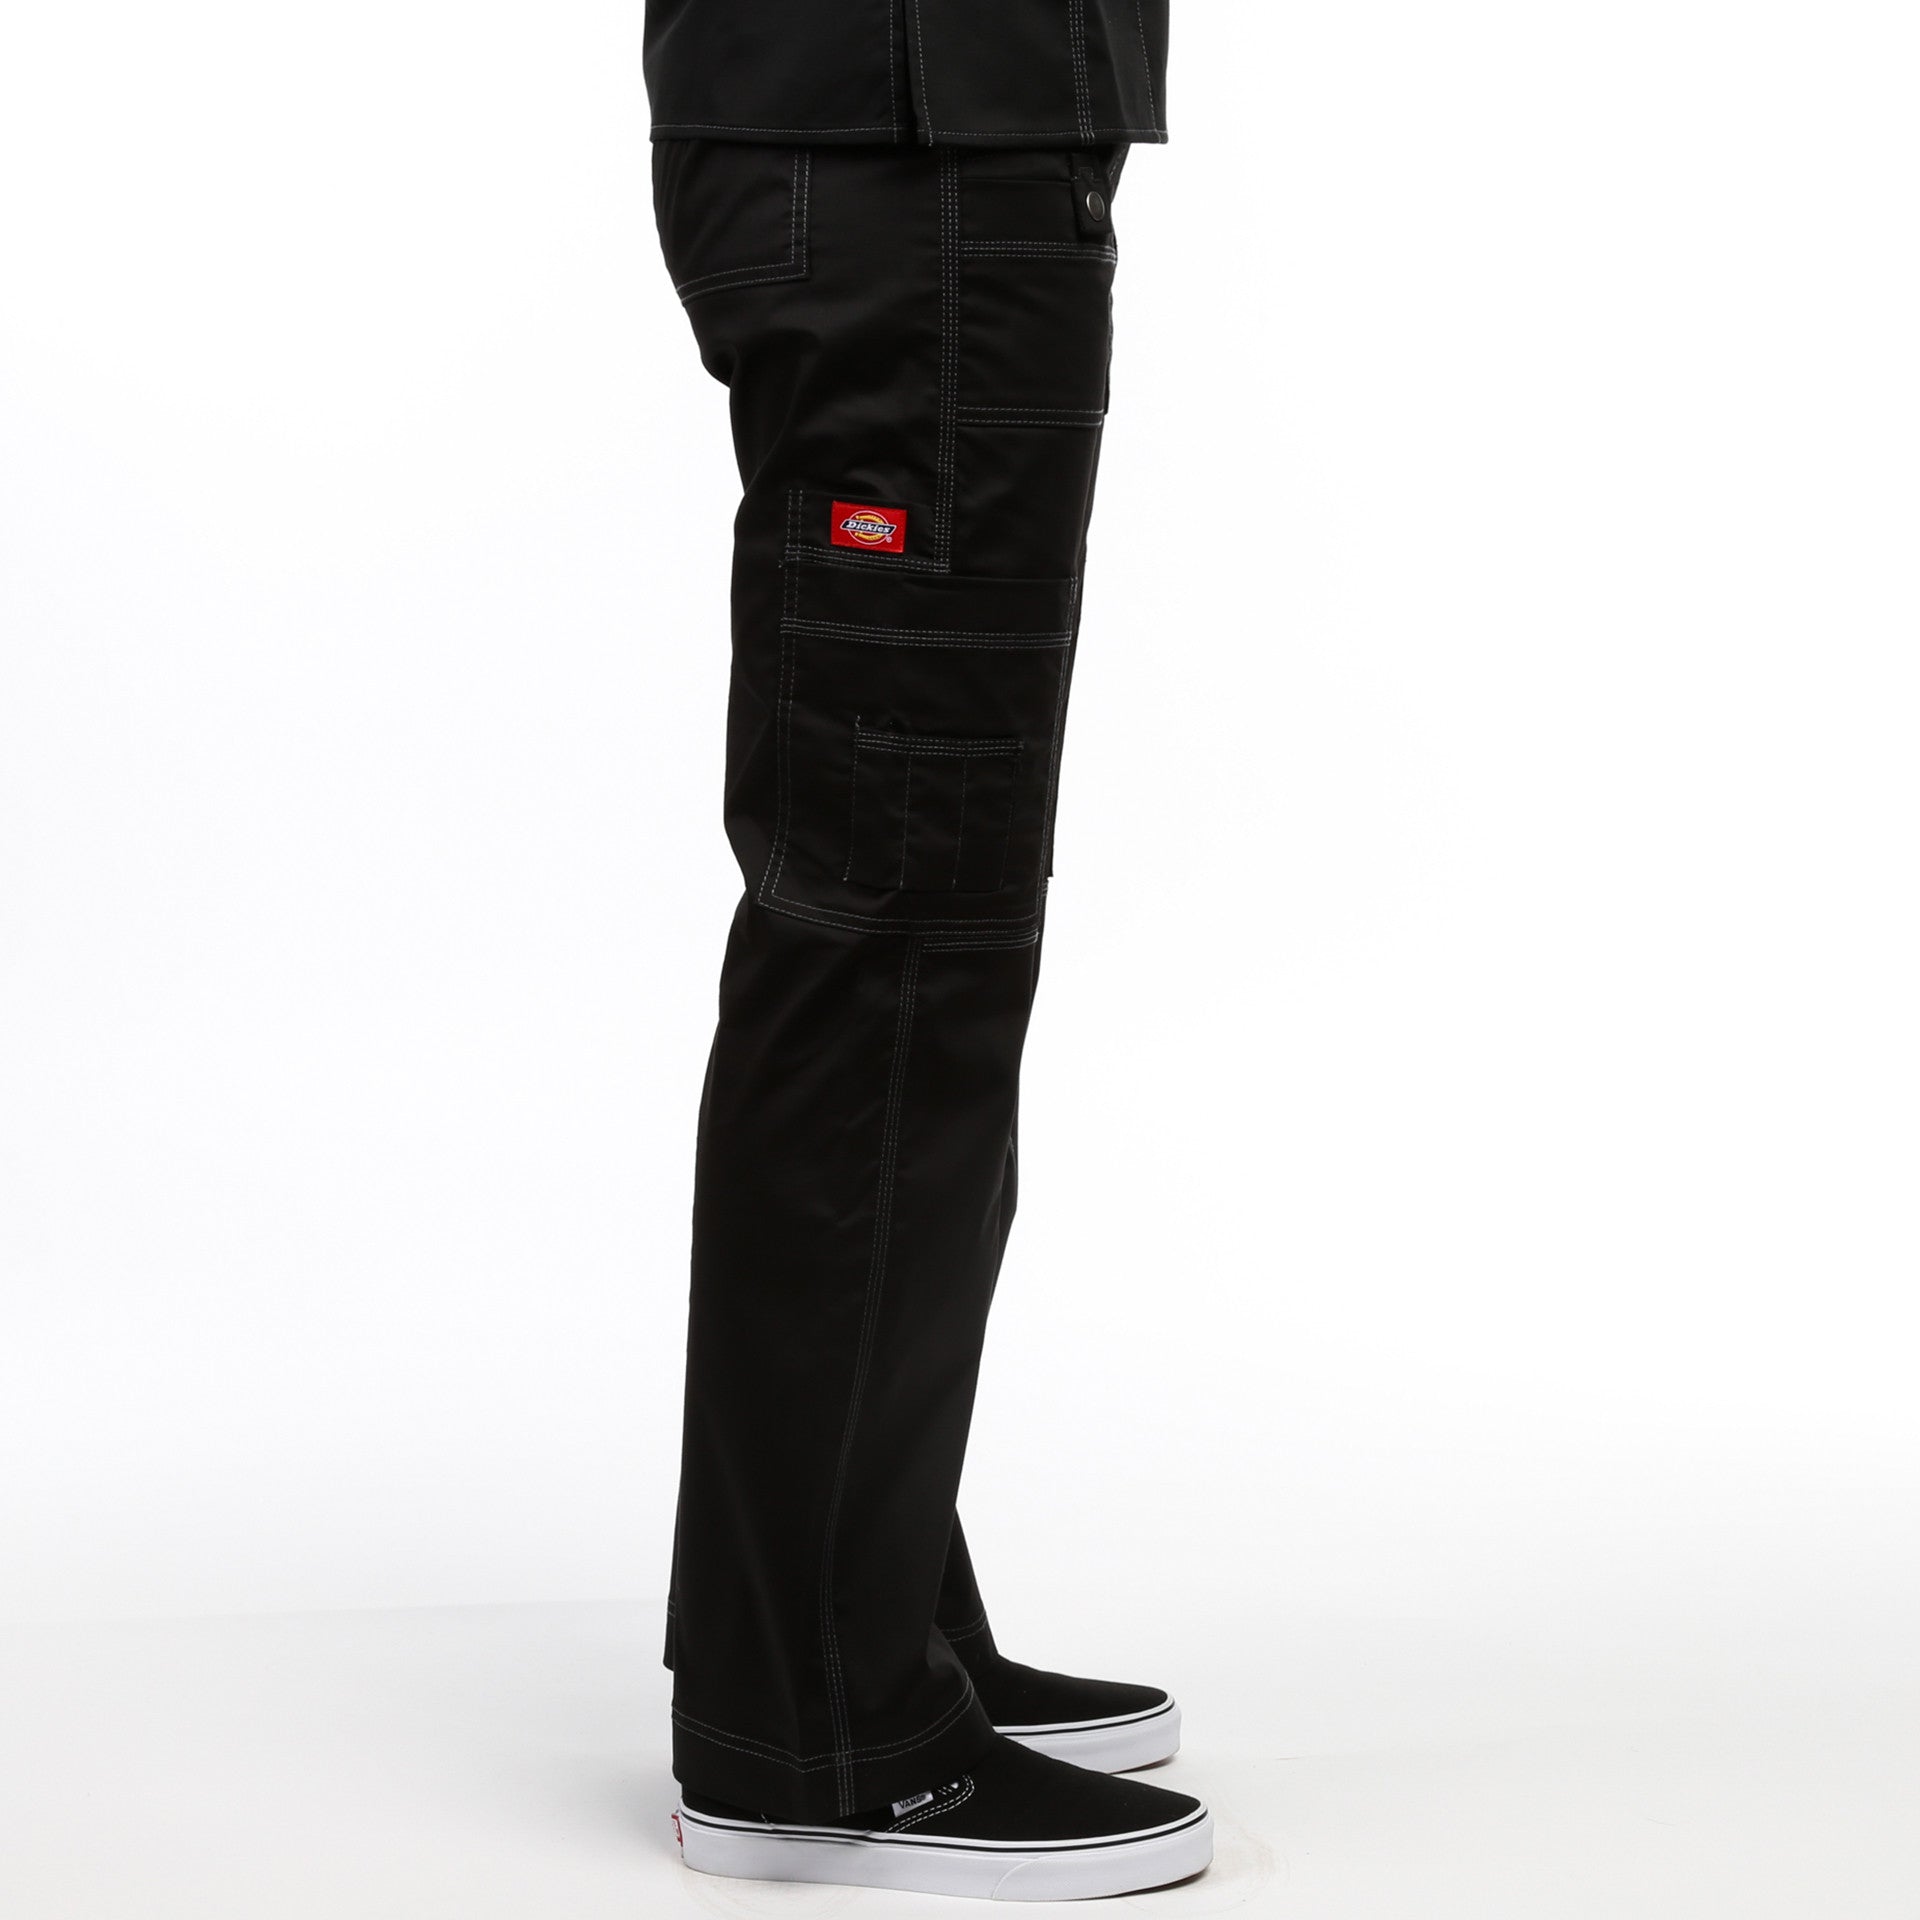 adidas x Undefeated Outerwear Pants Black/Utility Black